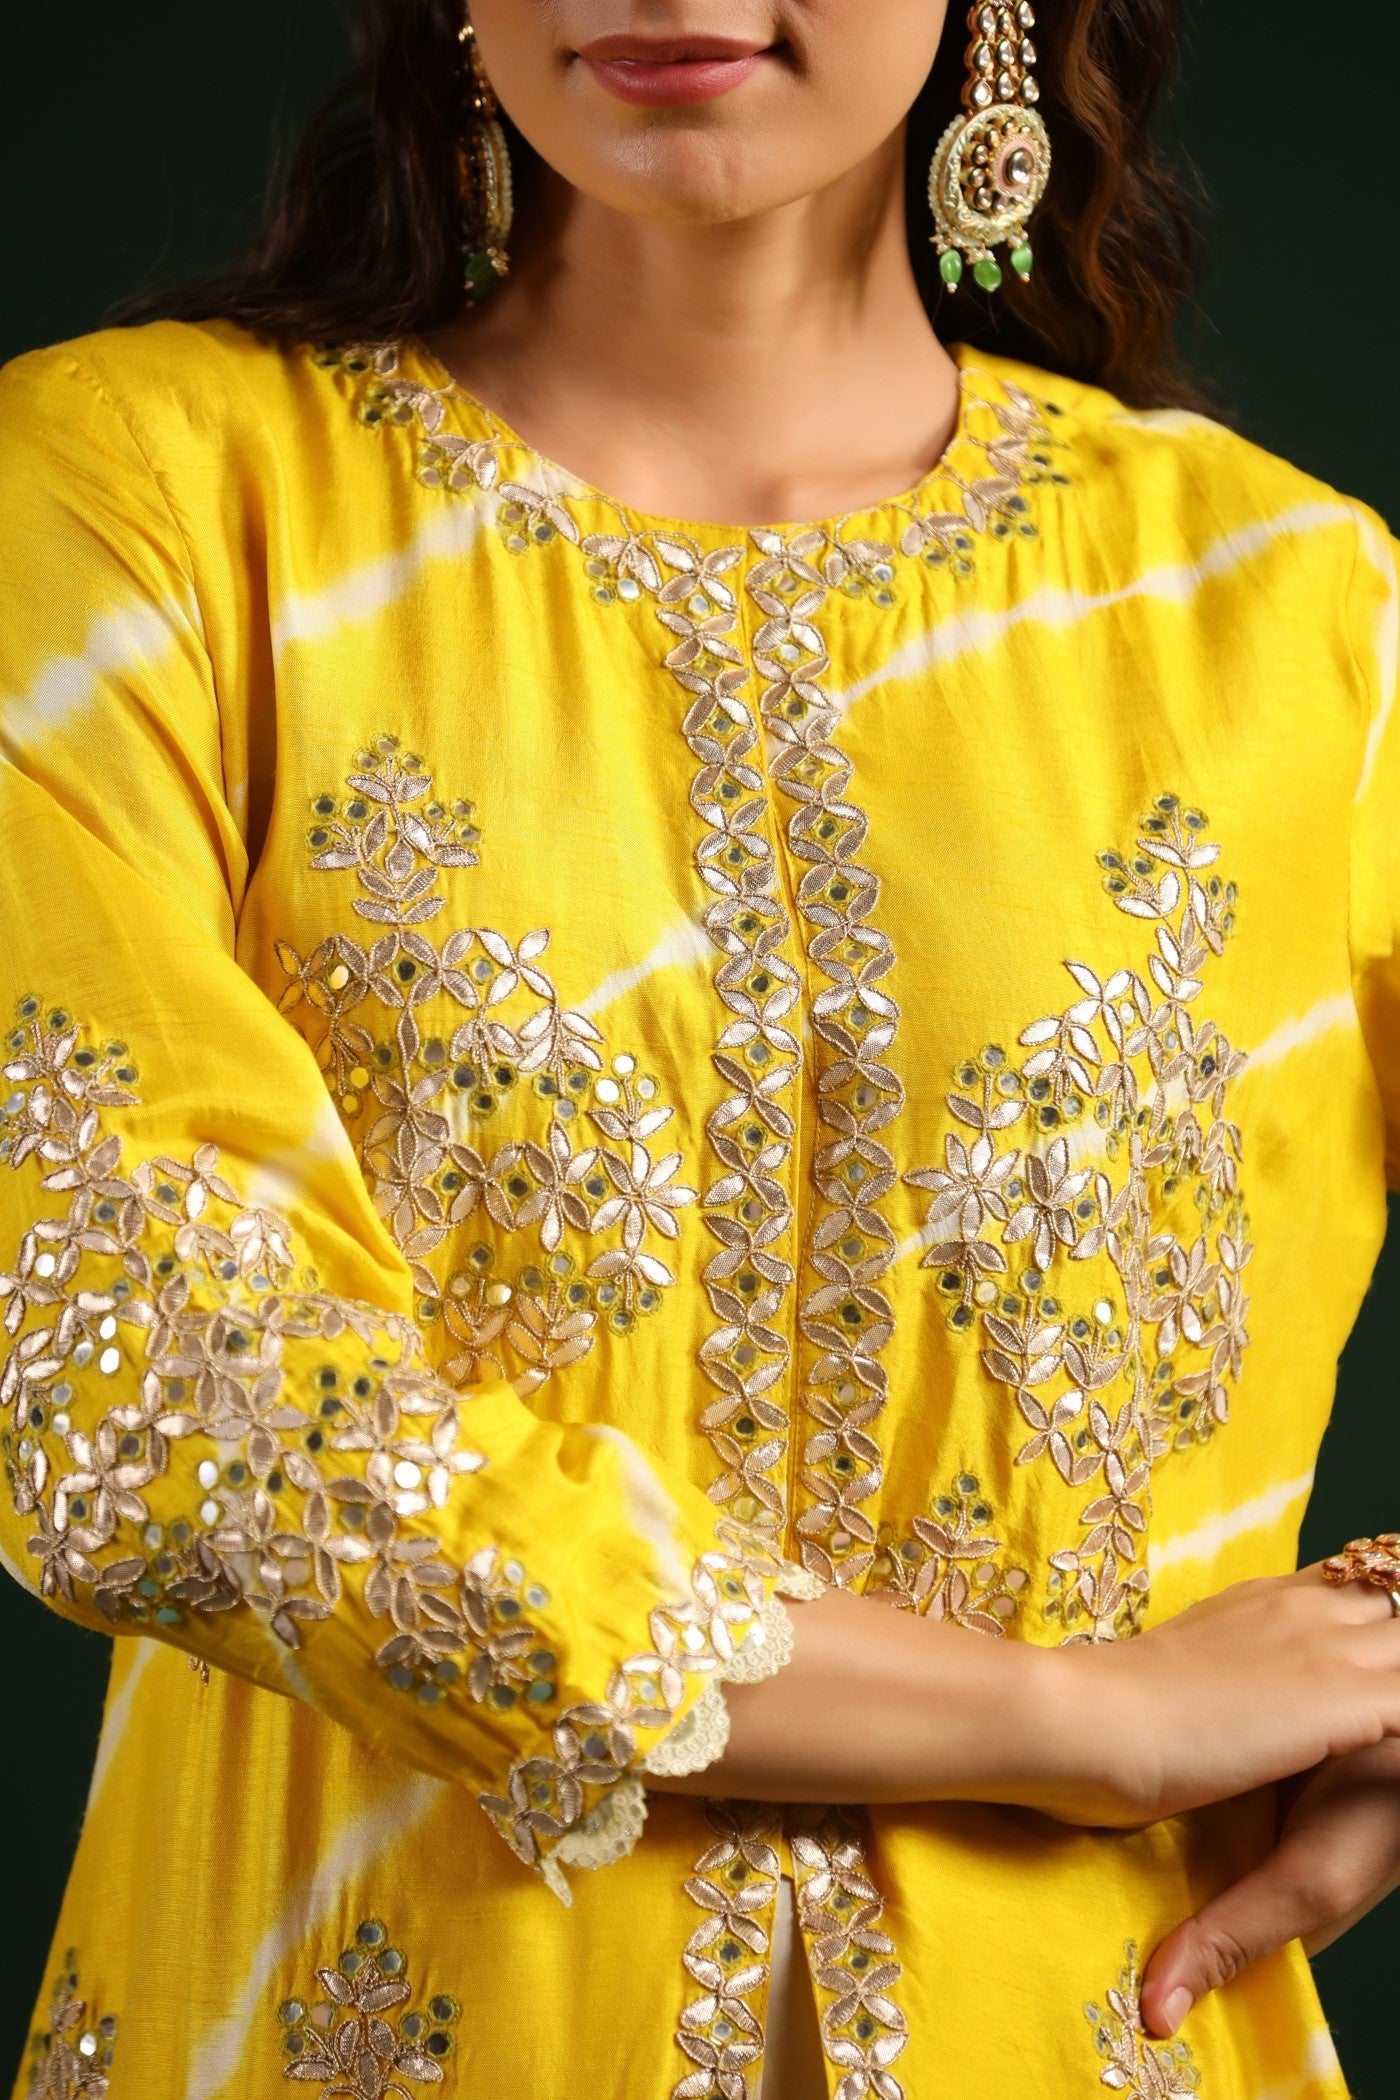 Bright Yellow Embellished Tunic With Contrast Harem Pants